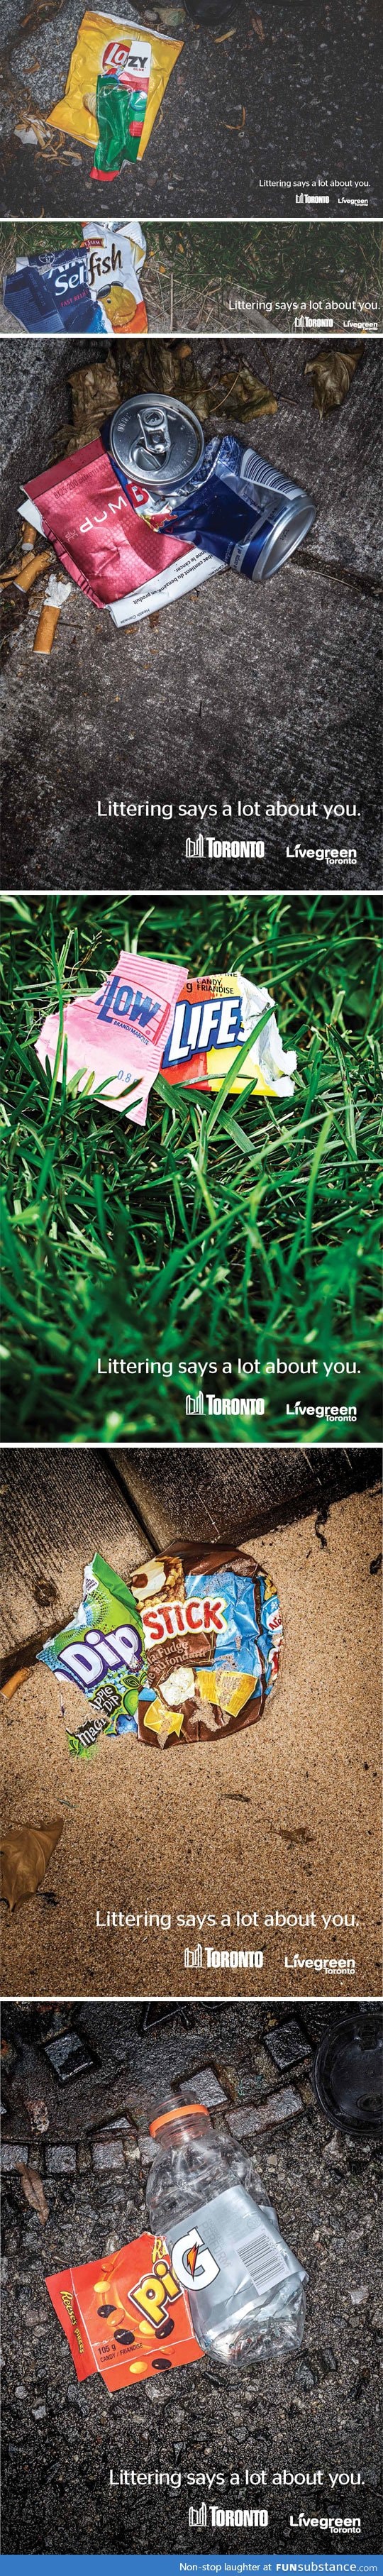 Littering says a lot about you